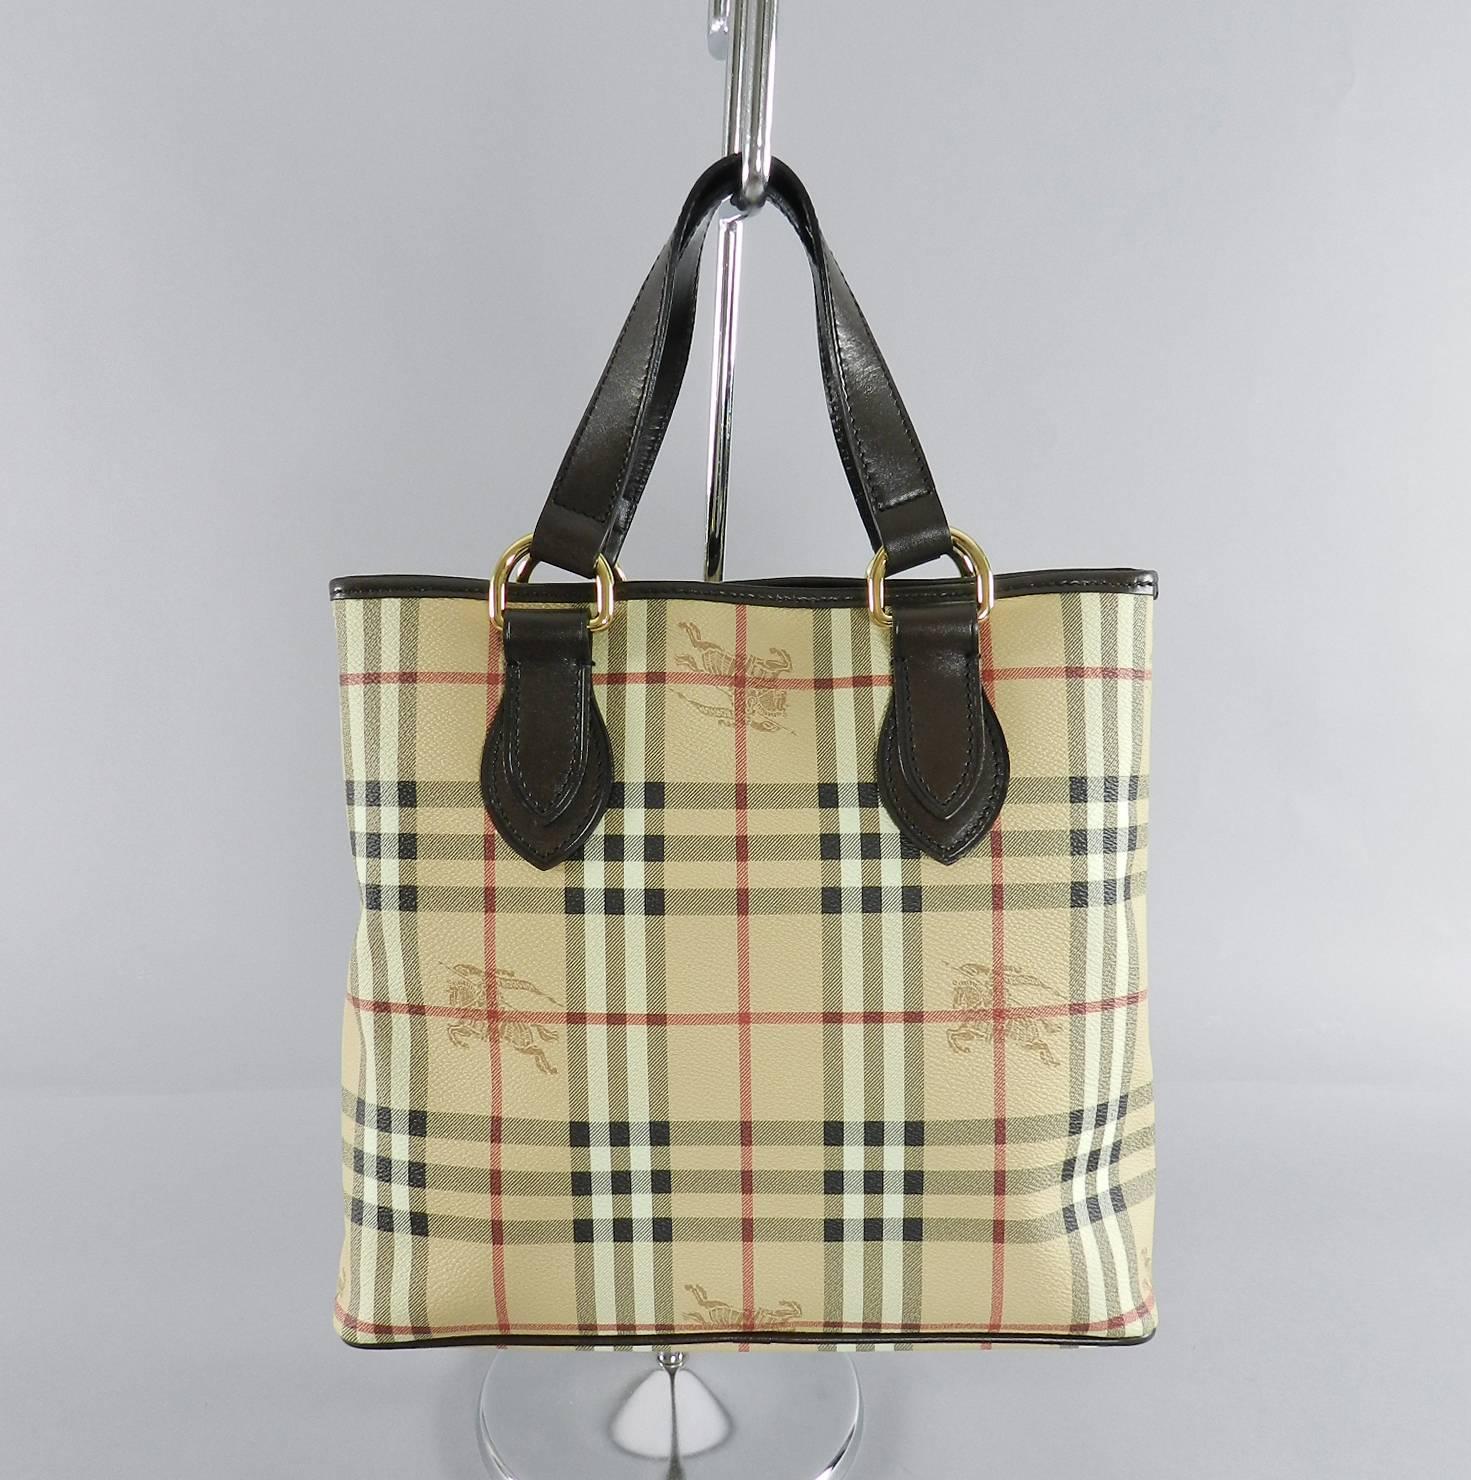 Burberry haymarket check Chester tote bag. Received as gift and unused - with box, ribbon, duster. Body of bag measures 11.75 x 10.75 x 3.75